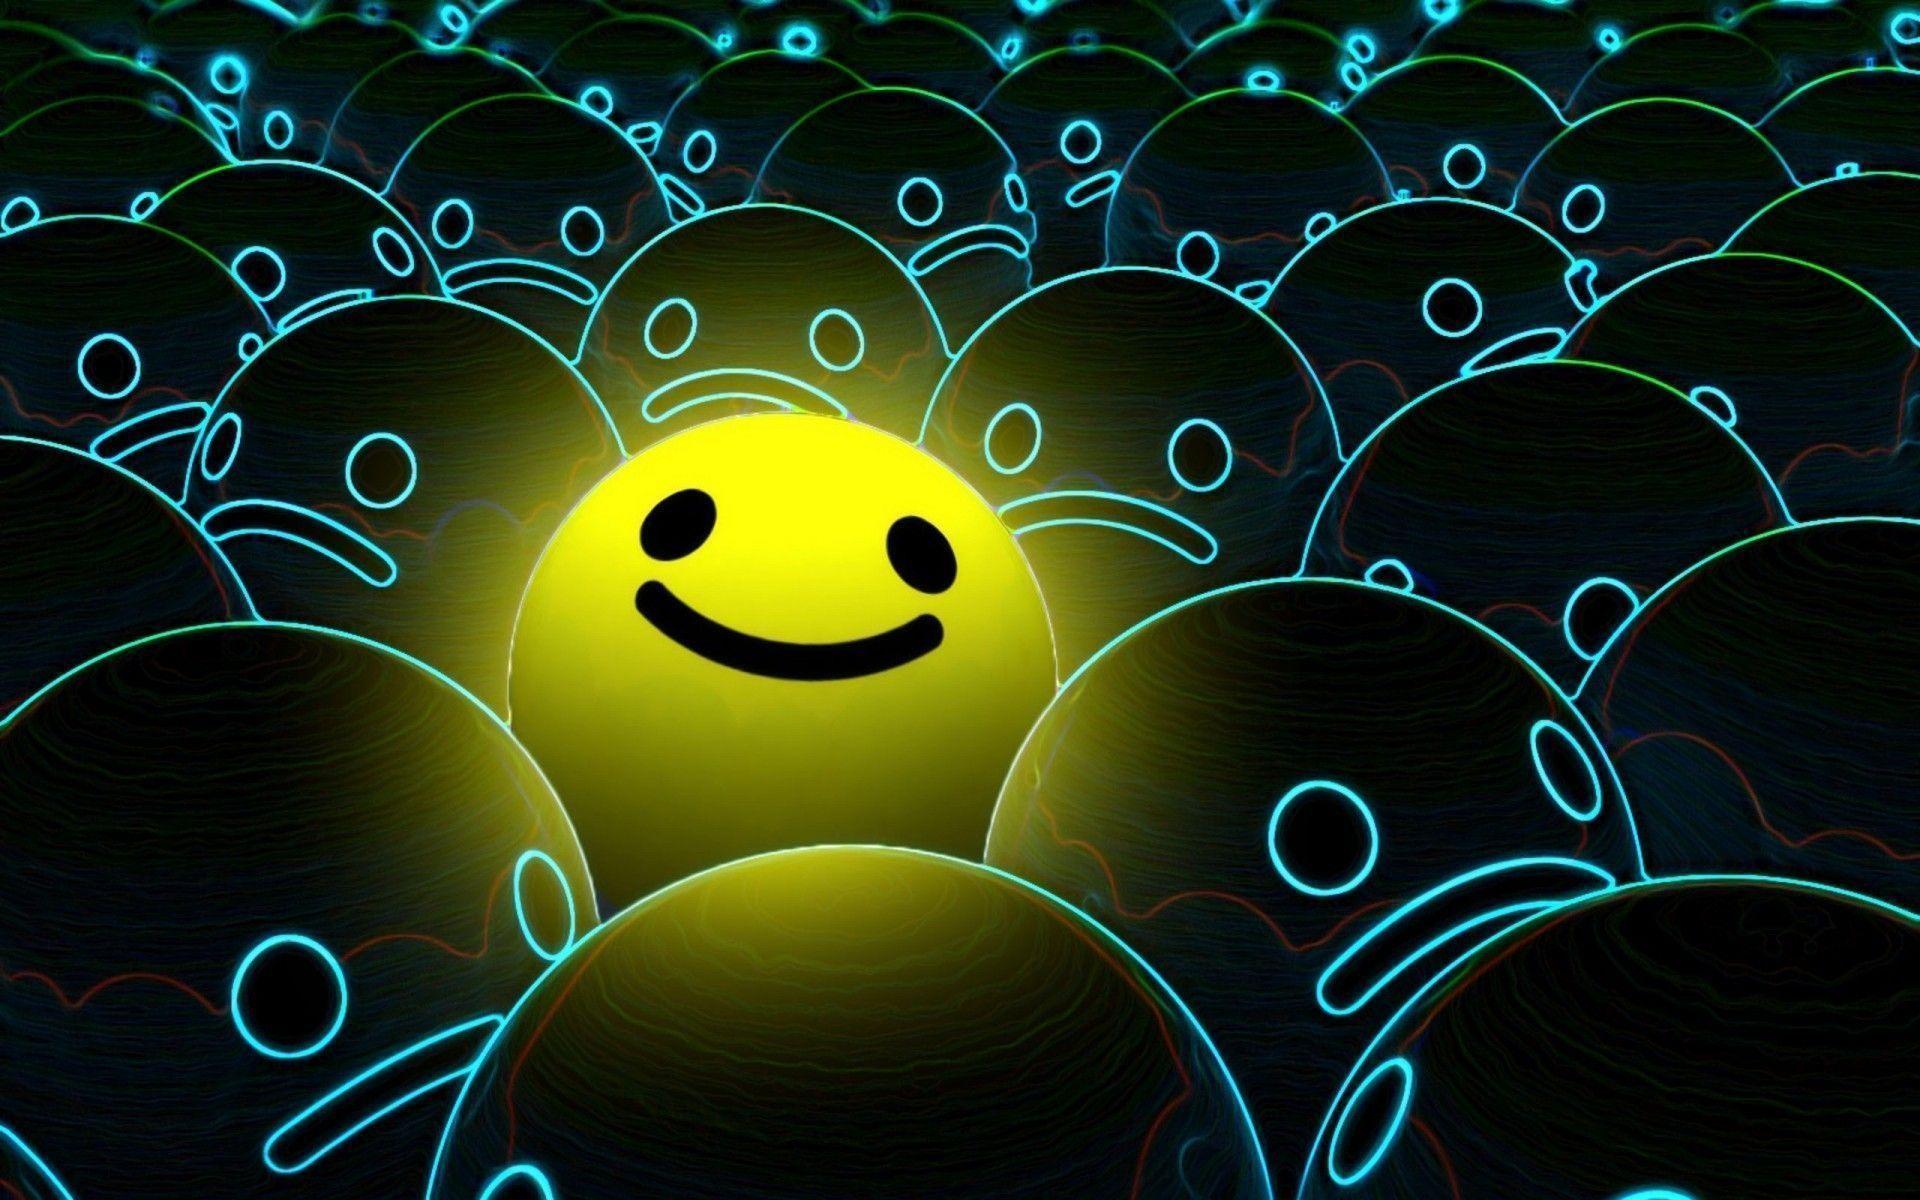 You are currently viewing Neon Smiley-Face Wallpaper Awesome smiley face wallpapers